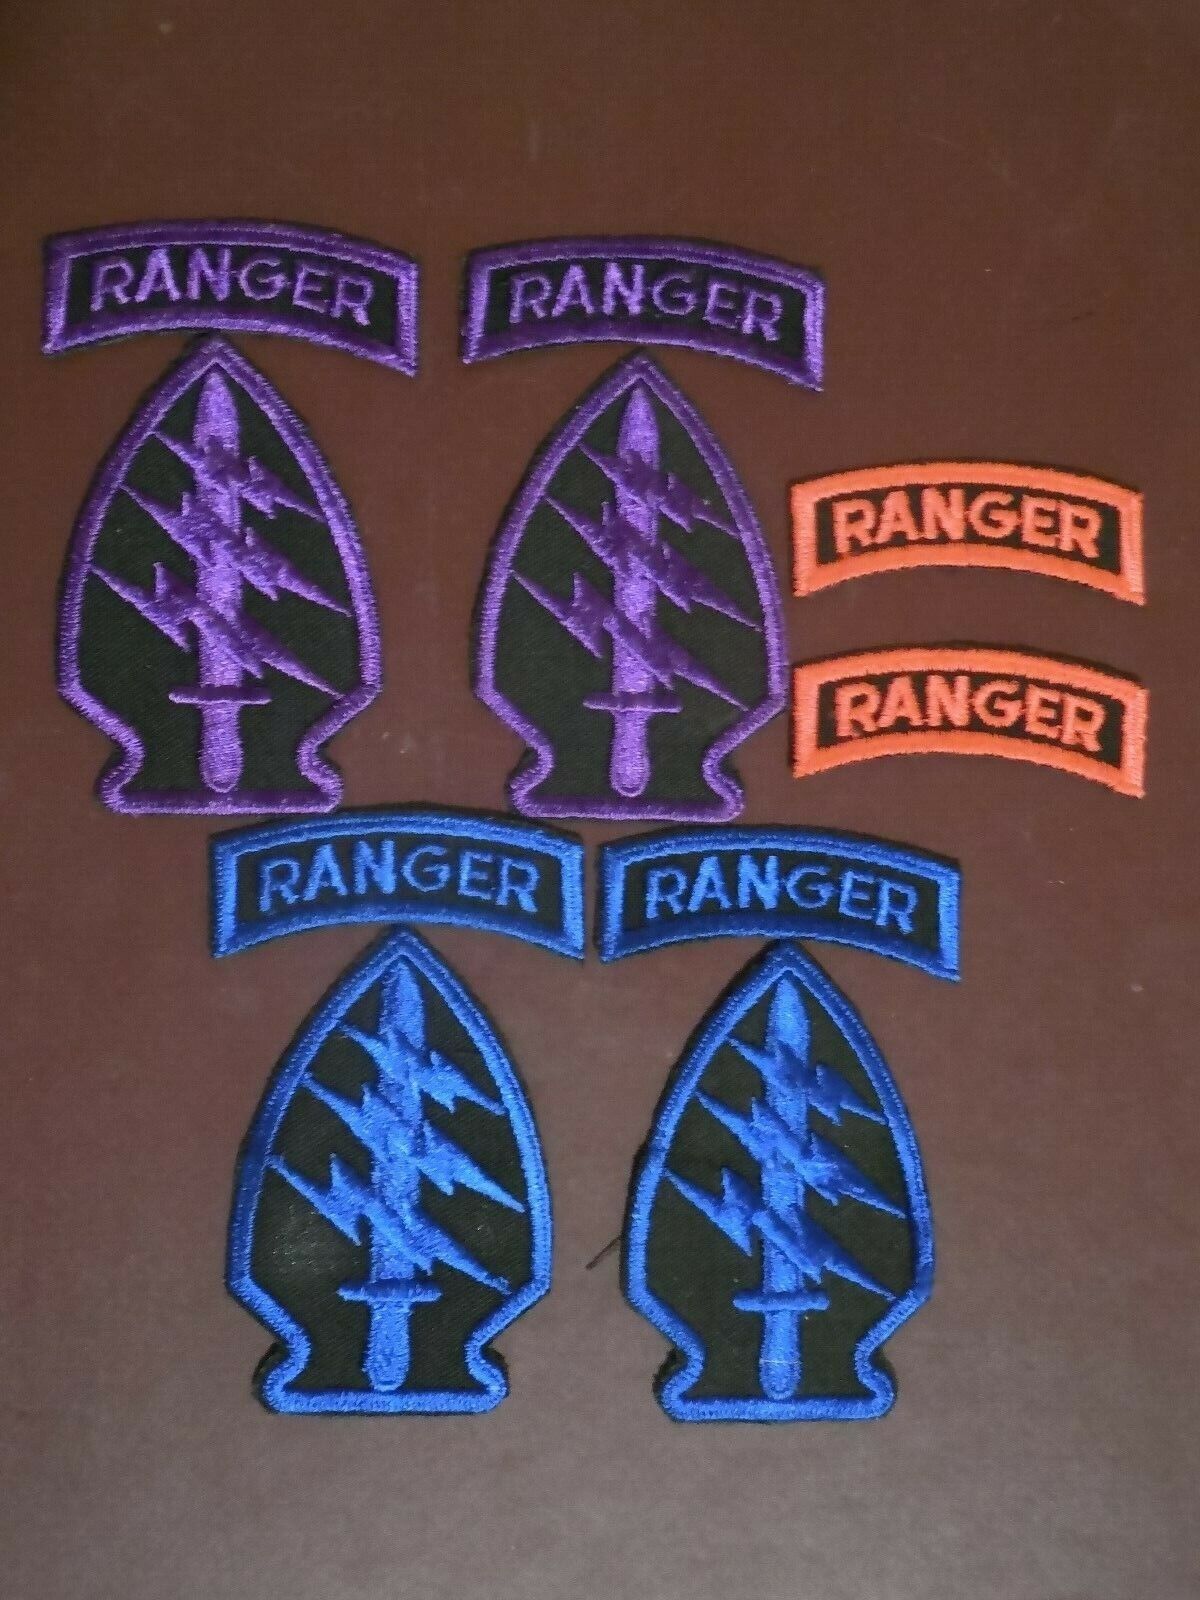 Special Forces Airborne Ranger Tab Patch Lot Insignia Rare Color Variation Group